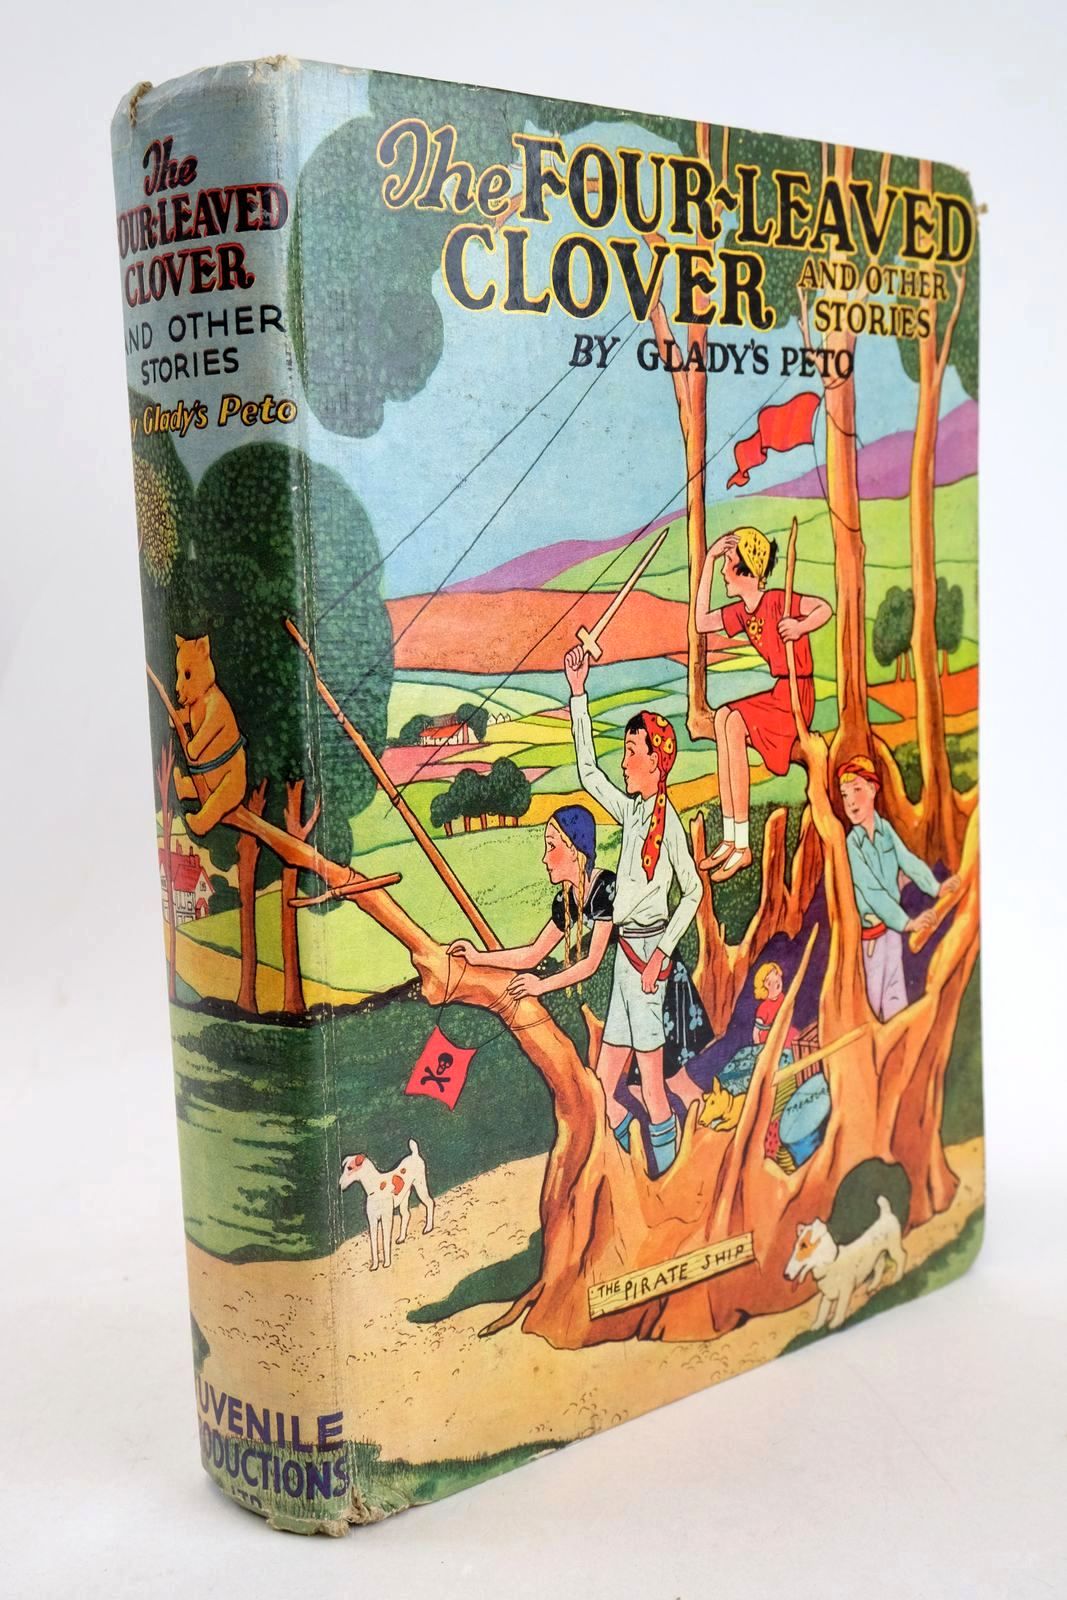 Photo of THE FOUR-LEAVED CLOVER AND OTHER STORIES written by Peto, Gladys illustrated by Peto, Gladys published by Juvenile Productions Ltd. (STOCK CODE: 1327652)  for sale by Stella & Rose's Books